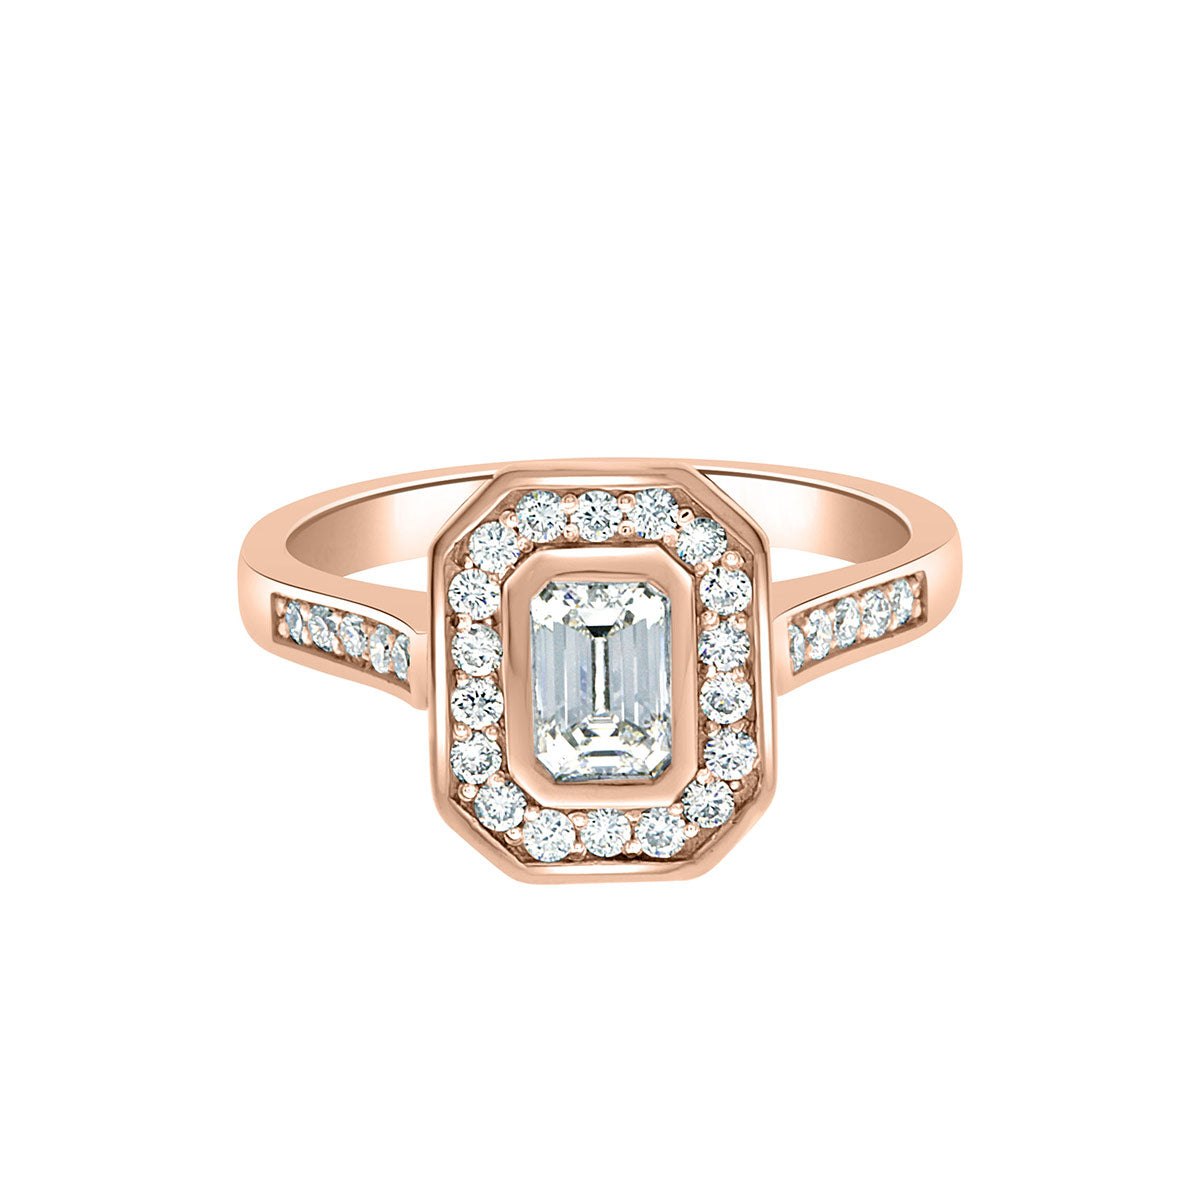 Emerald Cut Halo Ring in rose gold